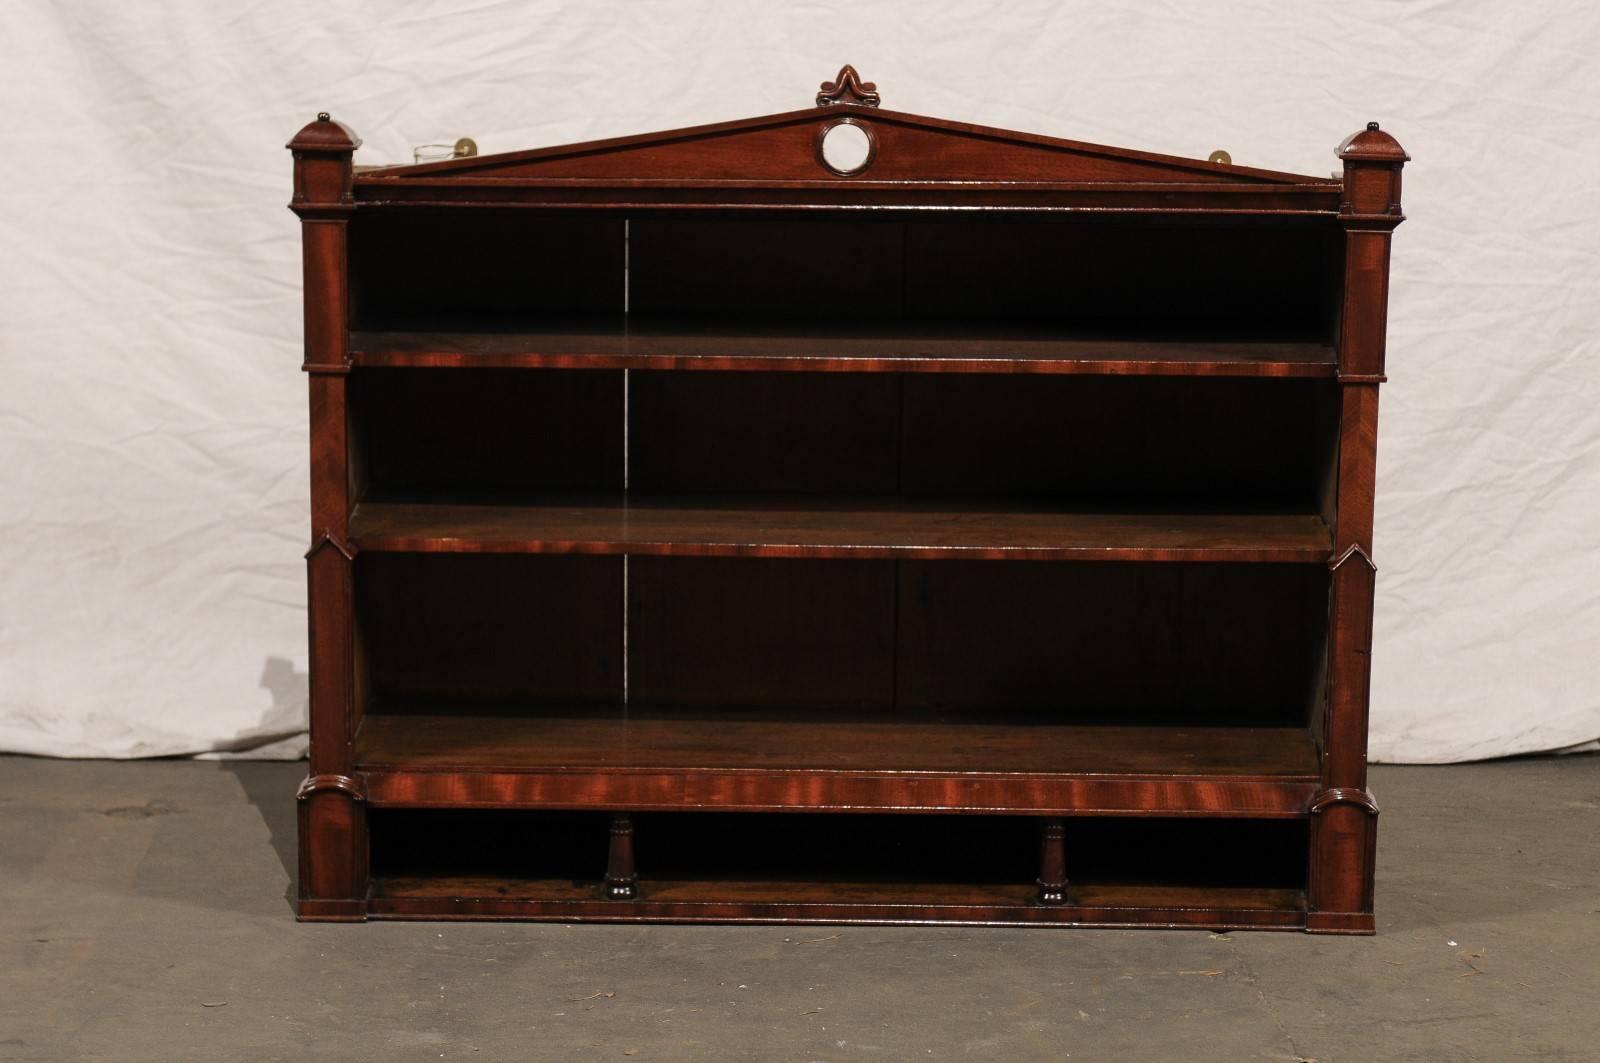 19th Century English Gothic Style Mahogany Hanging Wall Shelf, pedimented, in the Regency style